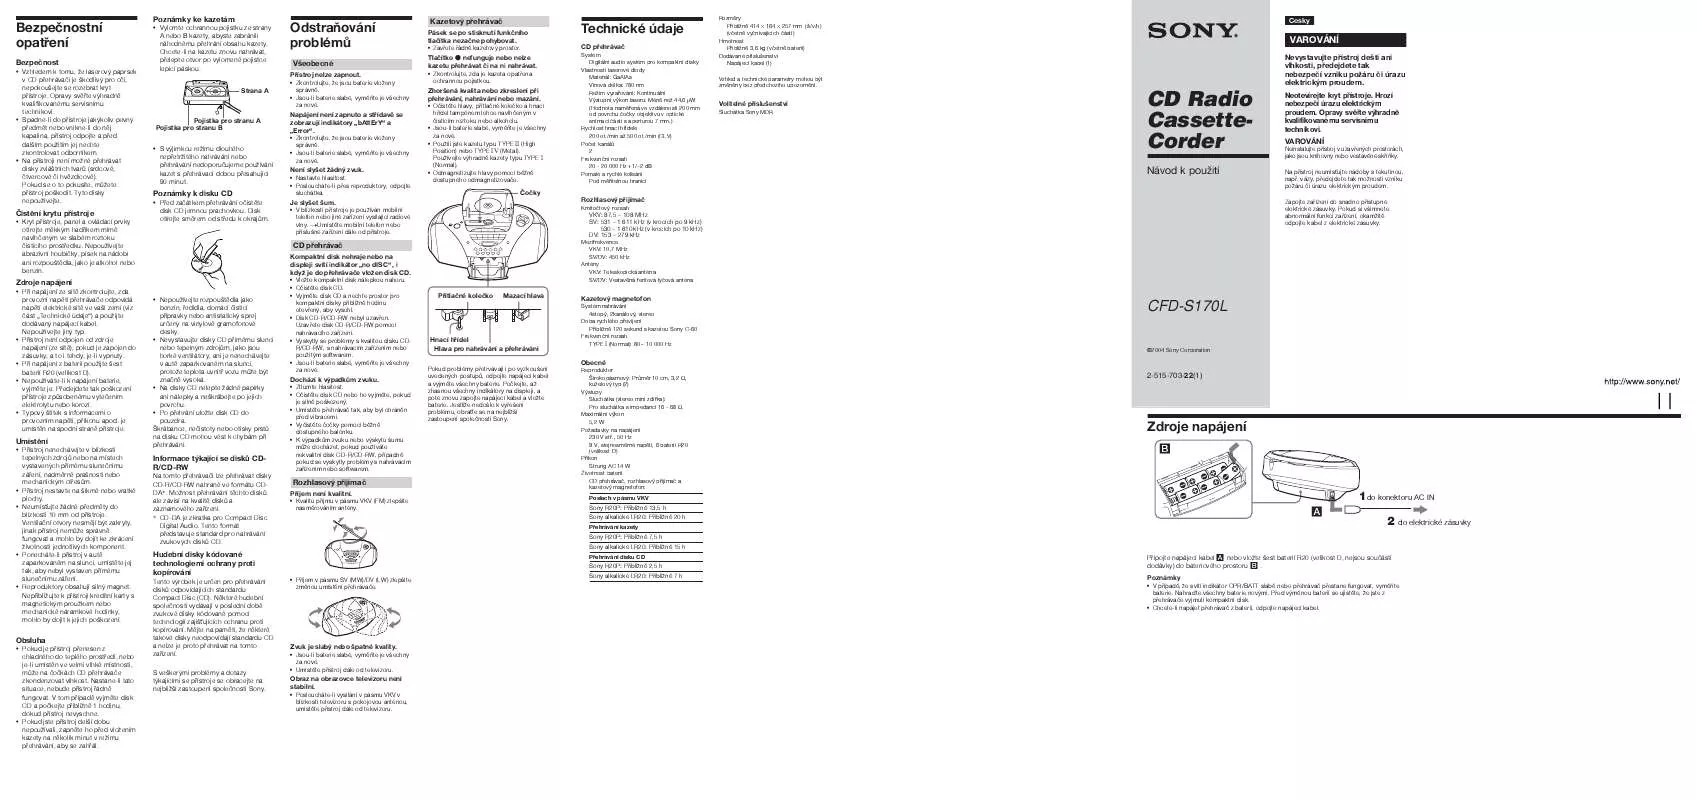 Mode d'emploi SONY CFD-S170L